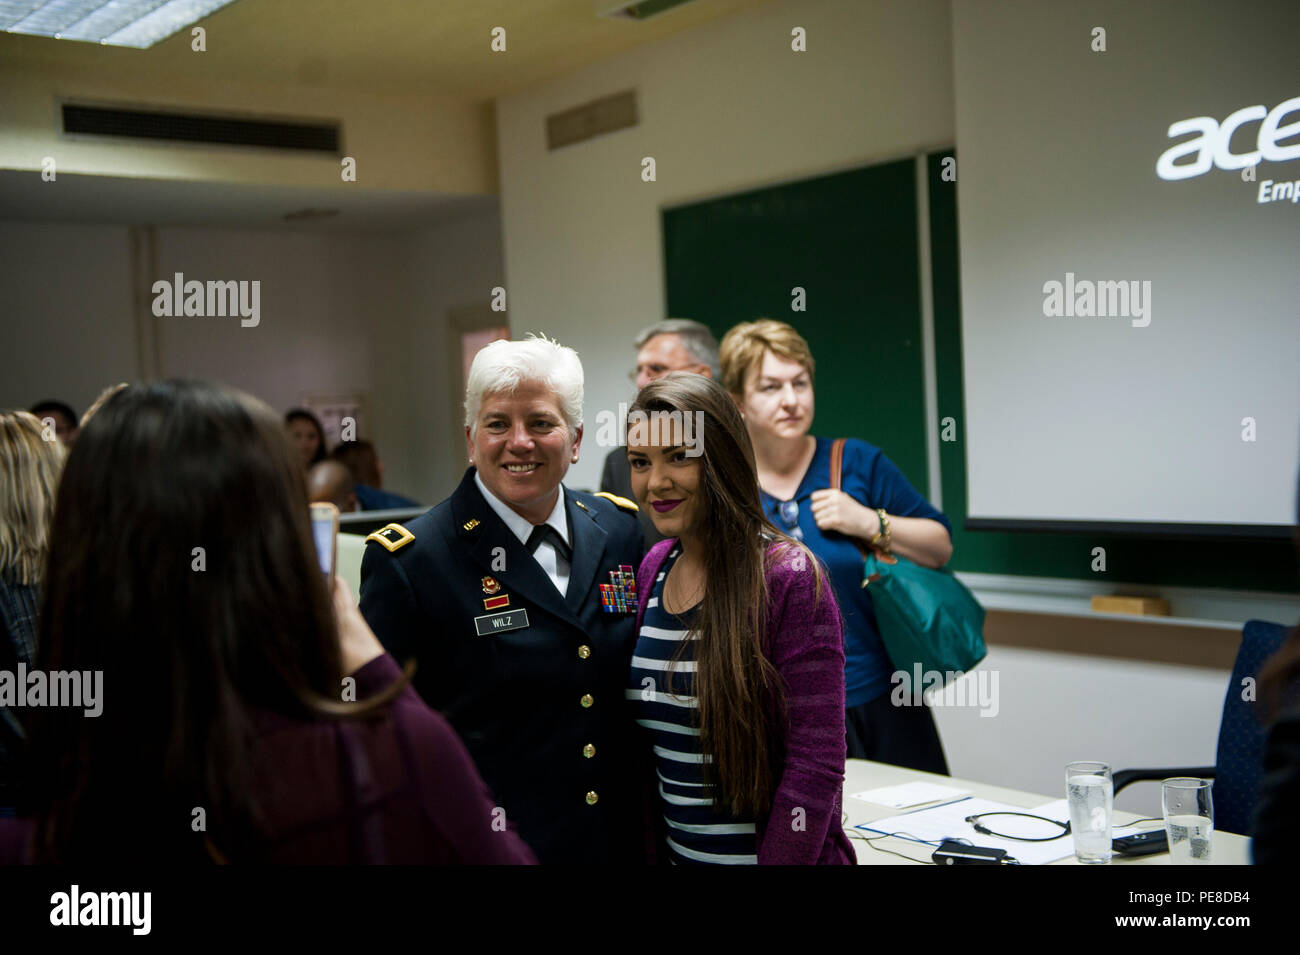 U.S. Army Brig. Gen. Giselle Wilz, NATO Headquarters Sarajevo commander, poses with a student for a photo during a visit to the University of Tuzla's Faculty of Law in Tuzla, Bosnia and Herzegovina Oct. 26, 2015. Wilz visited the university to meet with students and discuss the benefits of being a member of NATO. (U.S. Air Force photo by Staff Sgt. Clayton Lenhardt/Released) Stock Photo